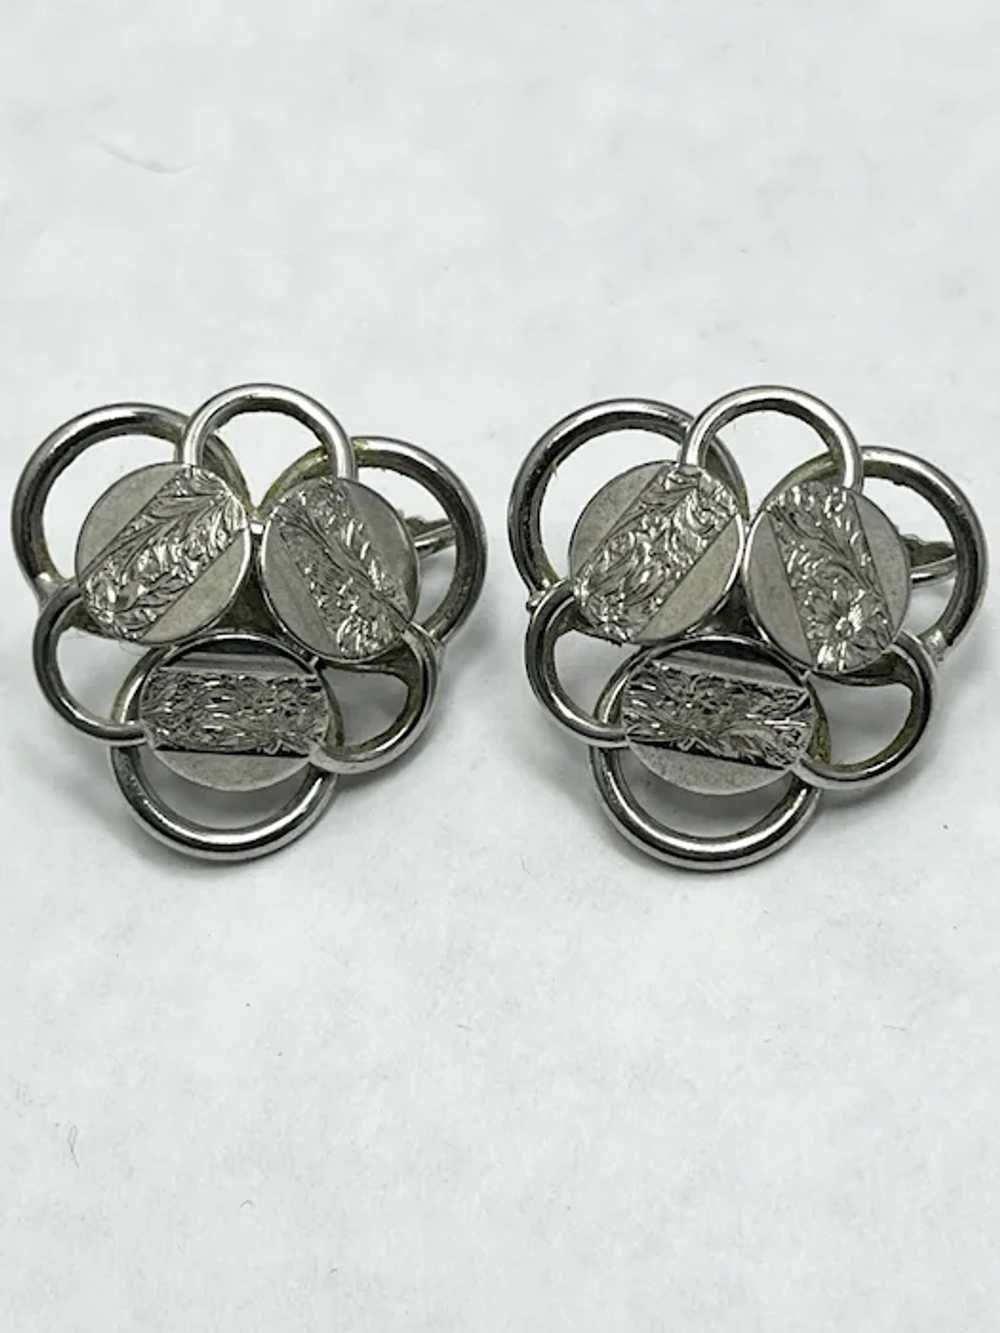 Vintage Sarah Coventry Clip On Earrings - image 3